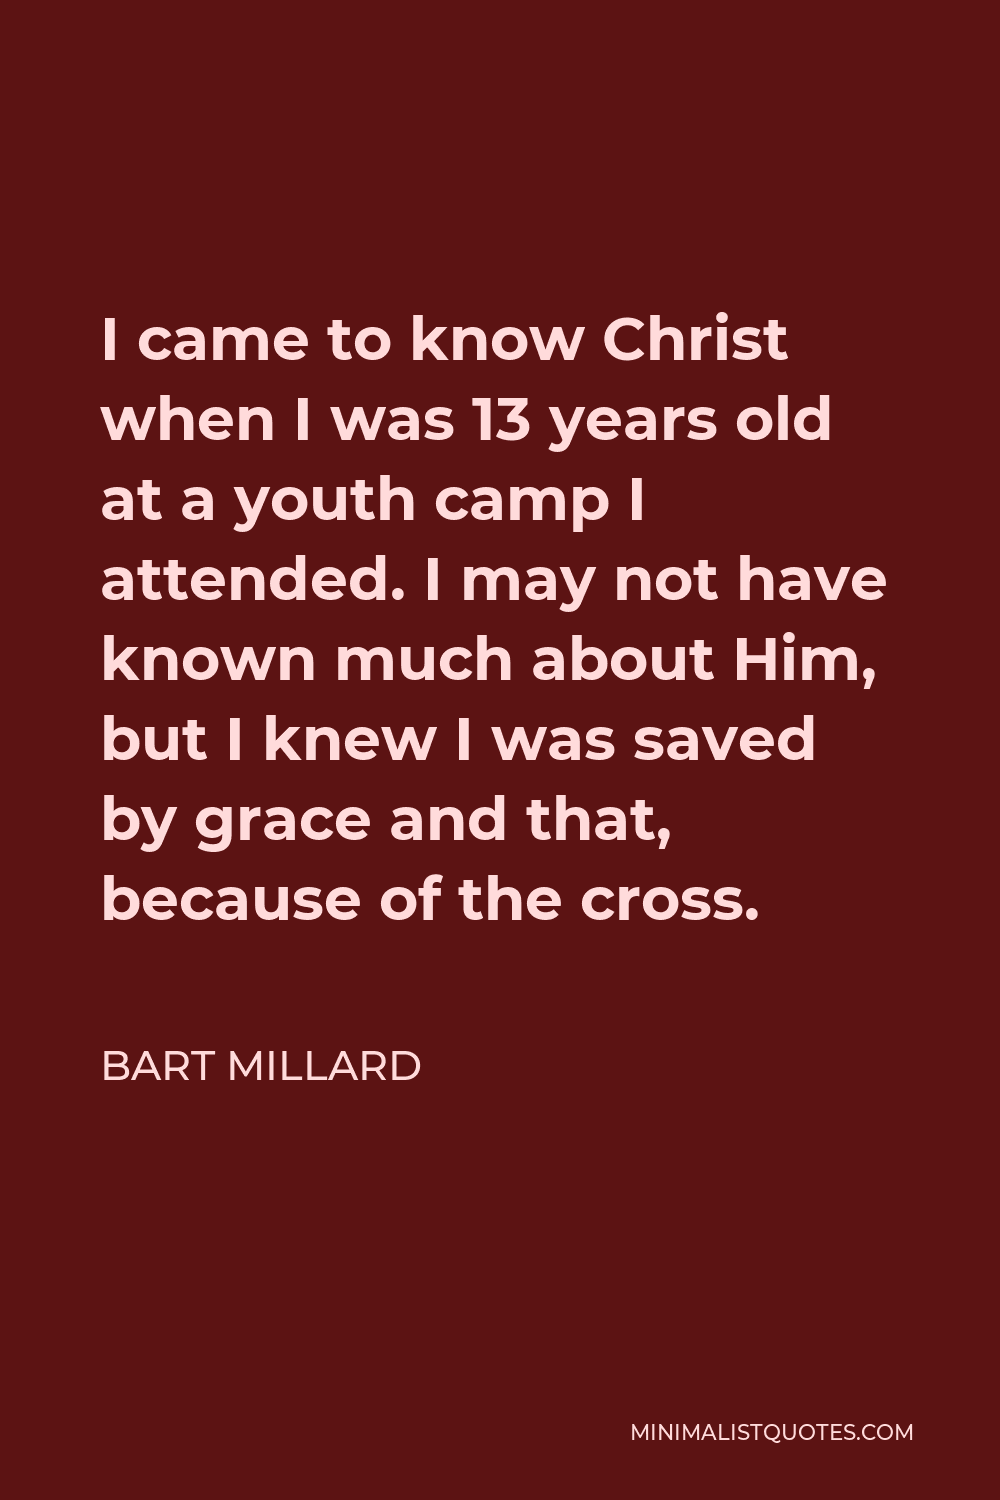 Bart Millard Quote - I came to know Christ when I was 13 years old at a youth camp I attended. I may not have known much about Him, but I knew I was saved by grace and that, because of the cross.